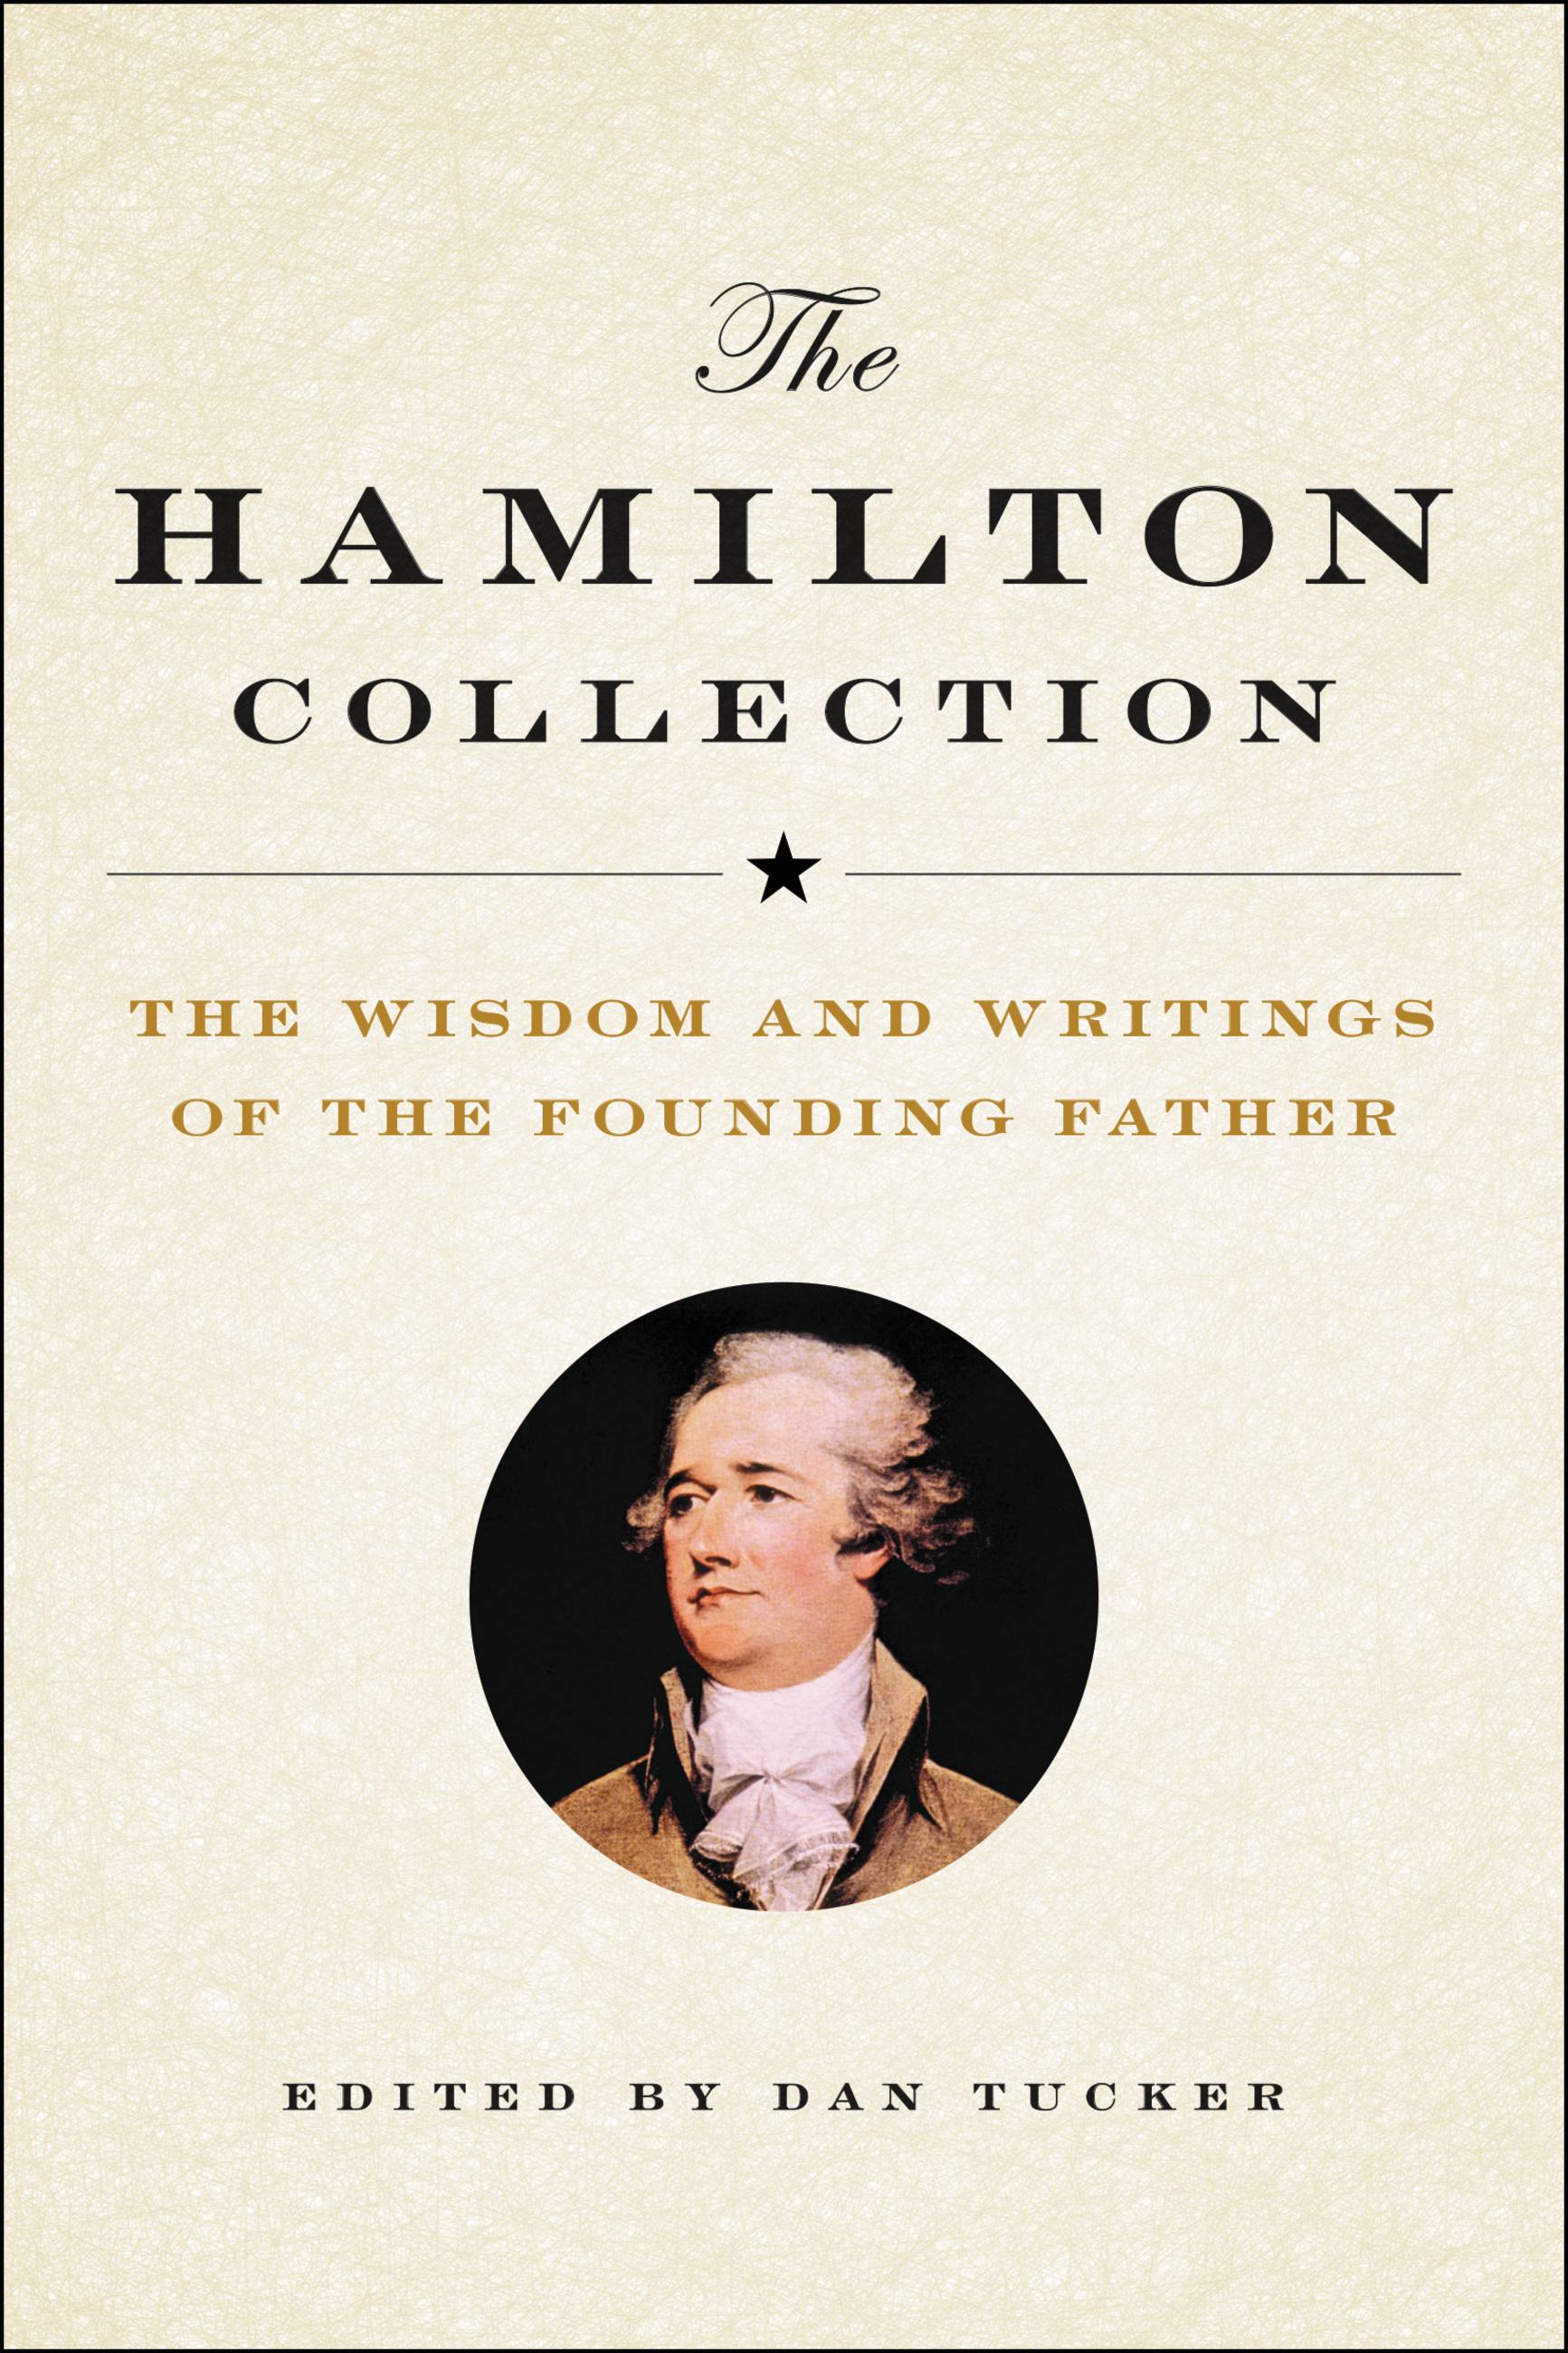 Image de couverture de The Hamilton Collection [electronic resource] : The Wisdom and Writings of the Founding Father